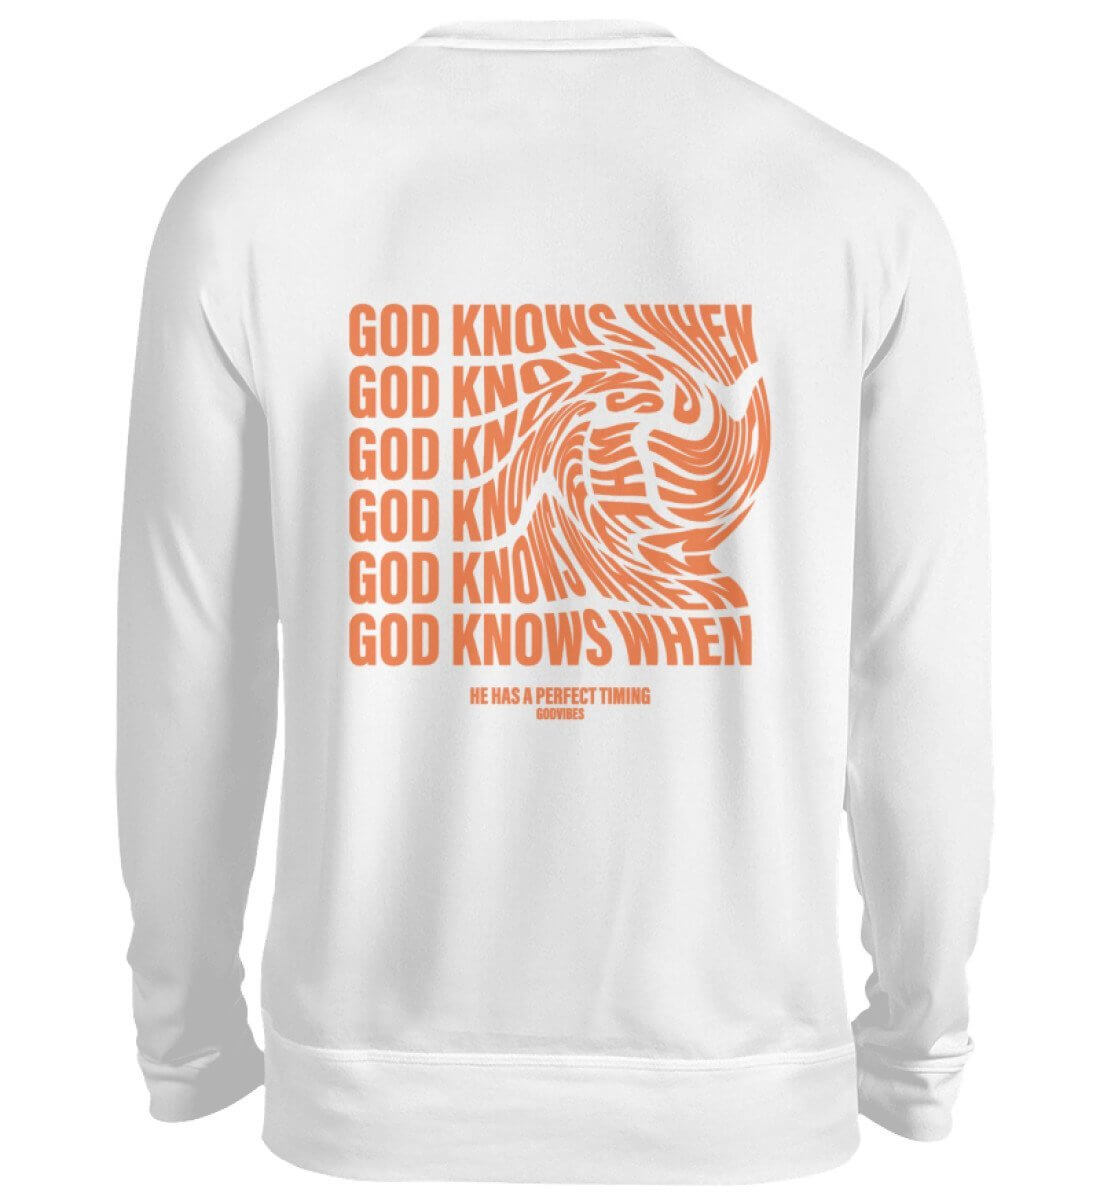 GOD KNOWS WHEN | Unisex Sweater - GODVIBES